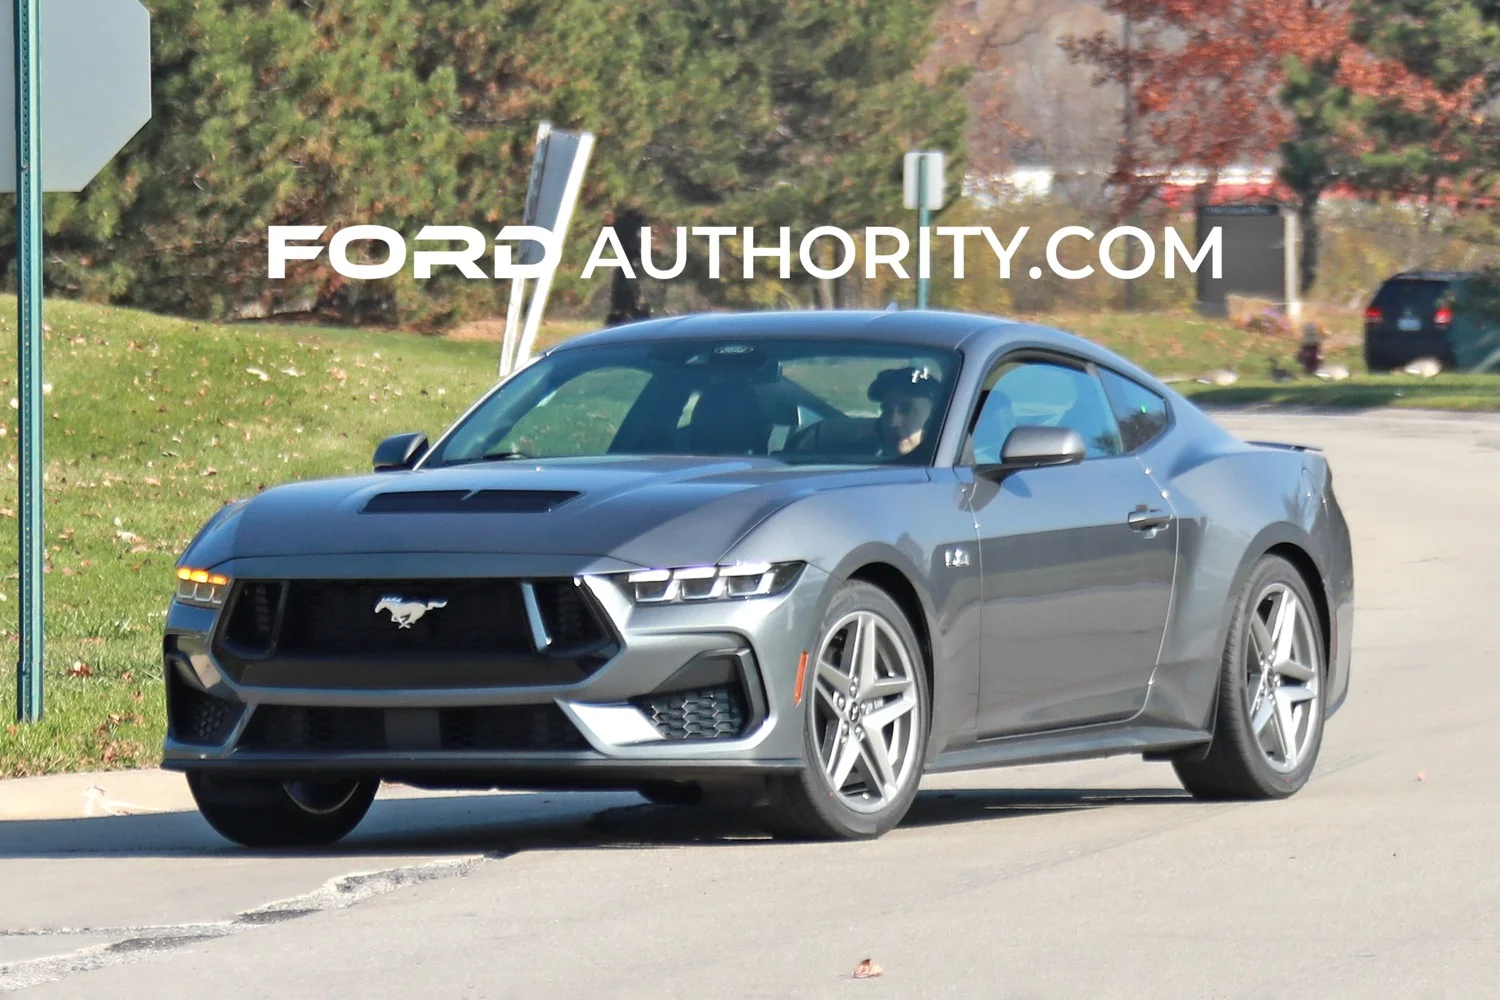 S650 Mustang Gray S650 Mustang GT spotted on road 1668285132730